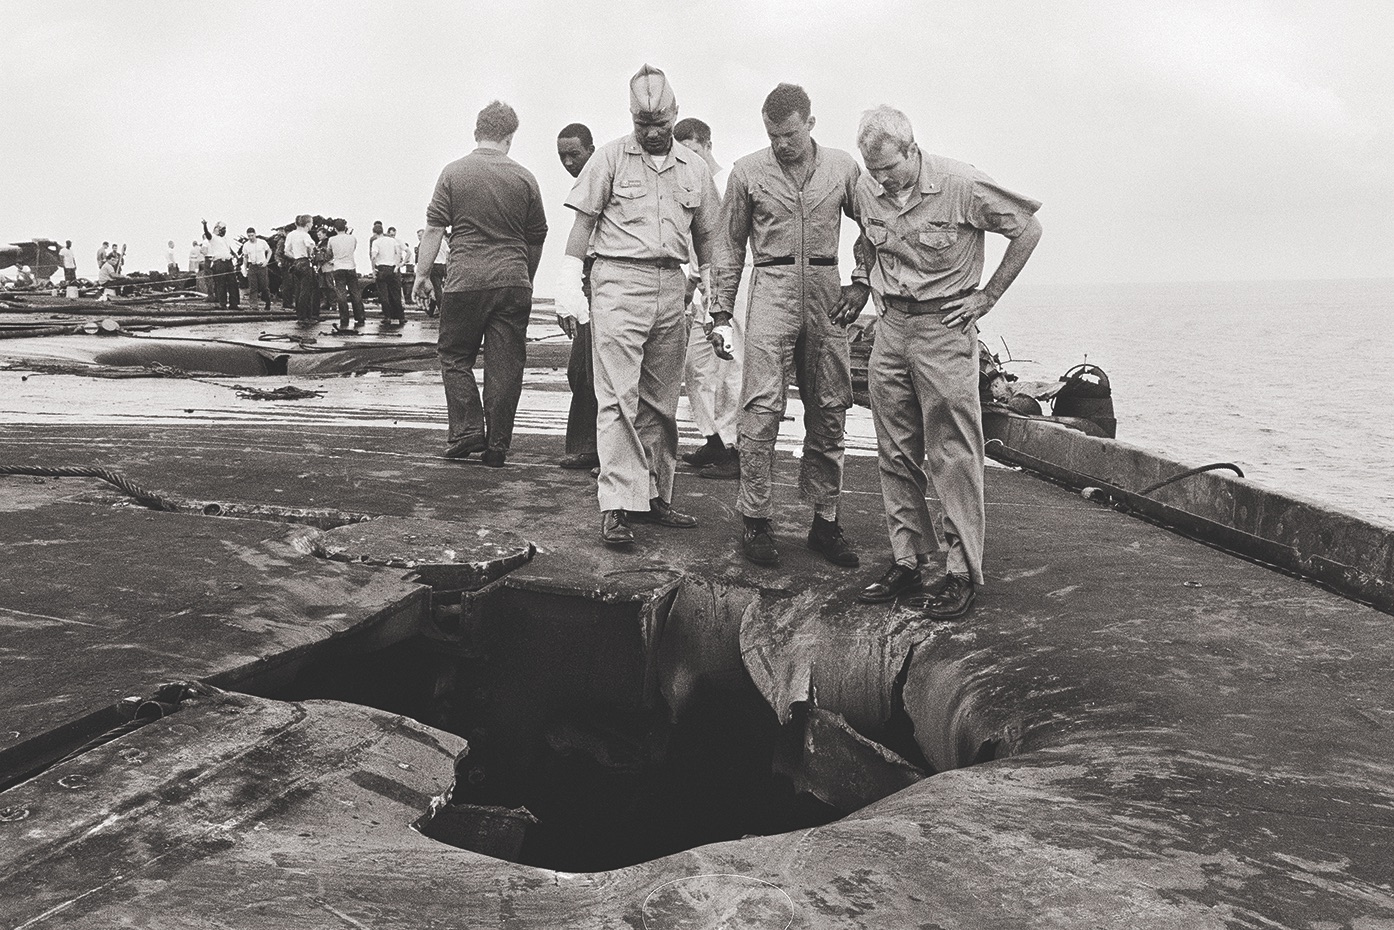 Surveying damage aboard the Forrestal, left, on July 30, 1967, is a group of pilots including Lt. Cmdr. John McCain (right) / Getty